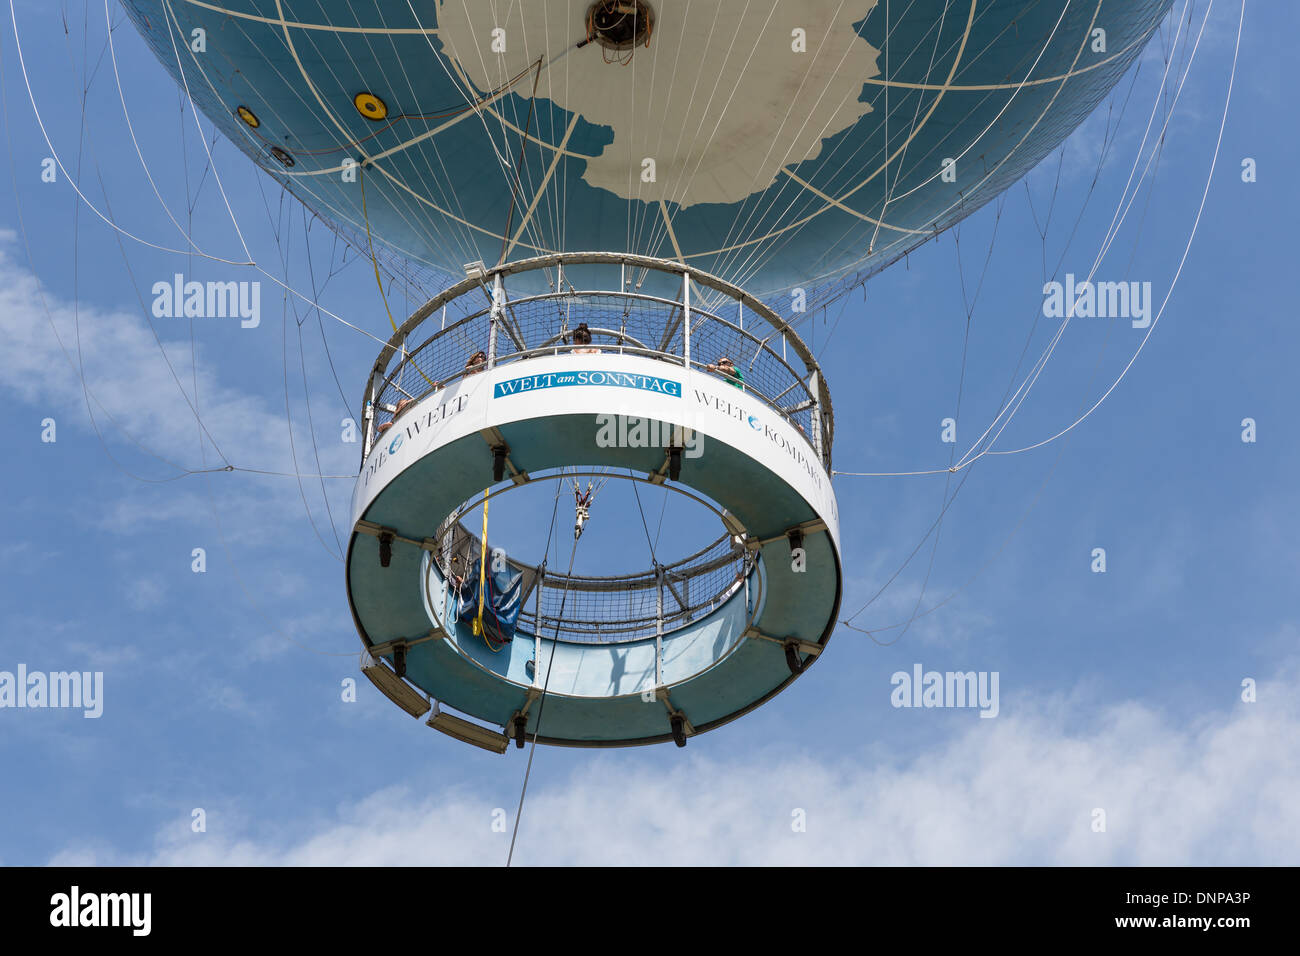 BERLIN, GERMANY - JULY 24: The Welt Balloon is a hot air balloon that takes  tourists 150 metres into the air above Berlin on Ju Stock Photo - Alamy